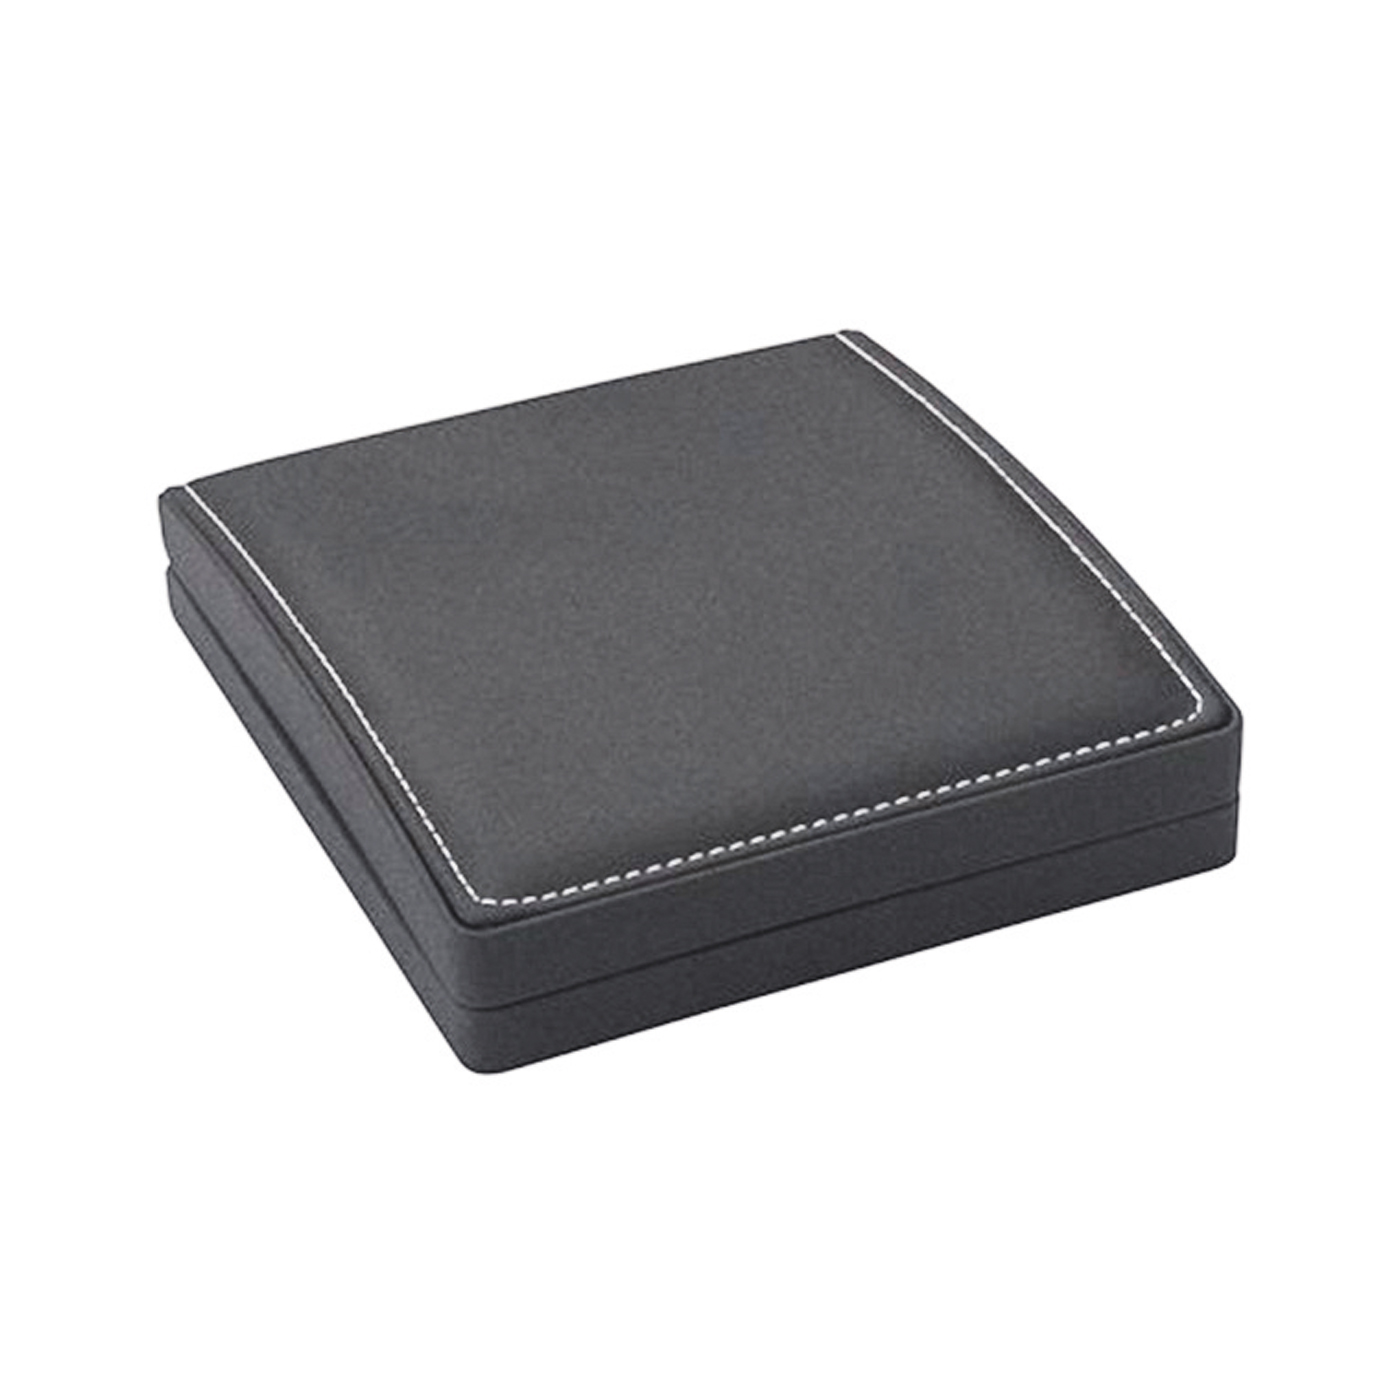 Jewellery Packaging "Soft Touch", Black, 165 x 177 x 29 mm - 1 piece